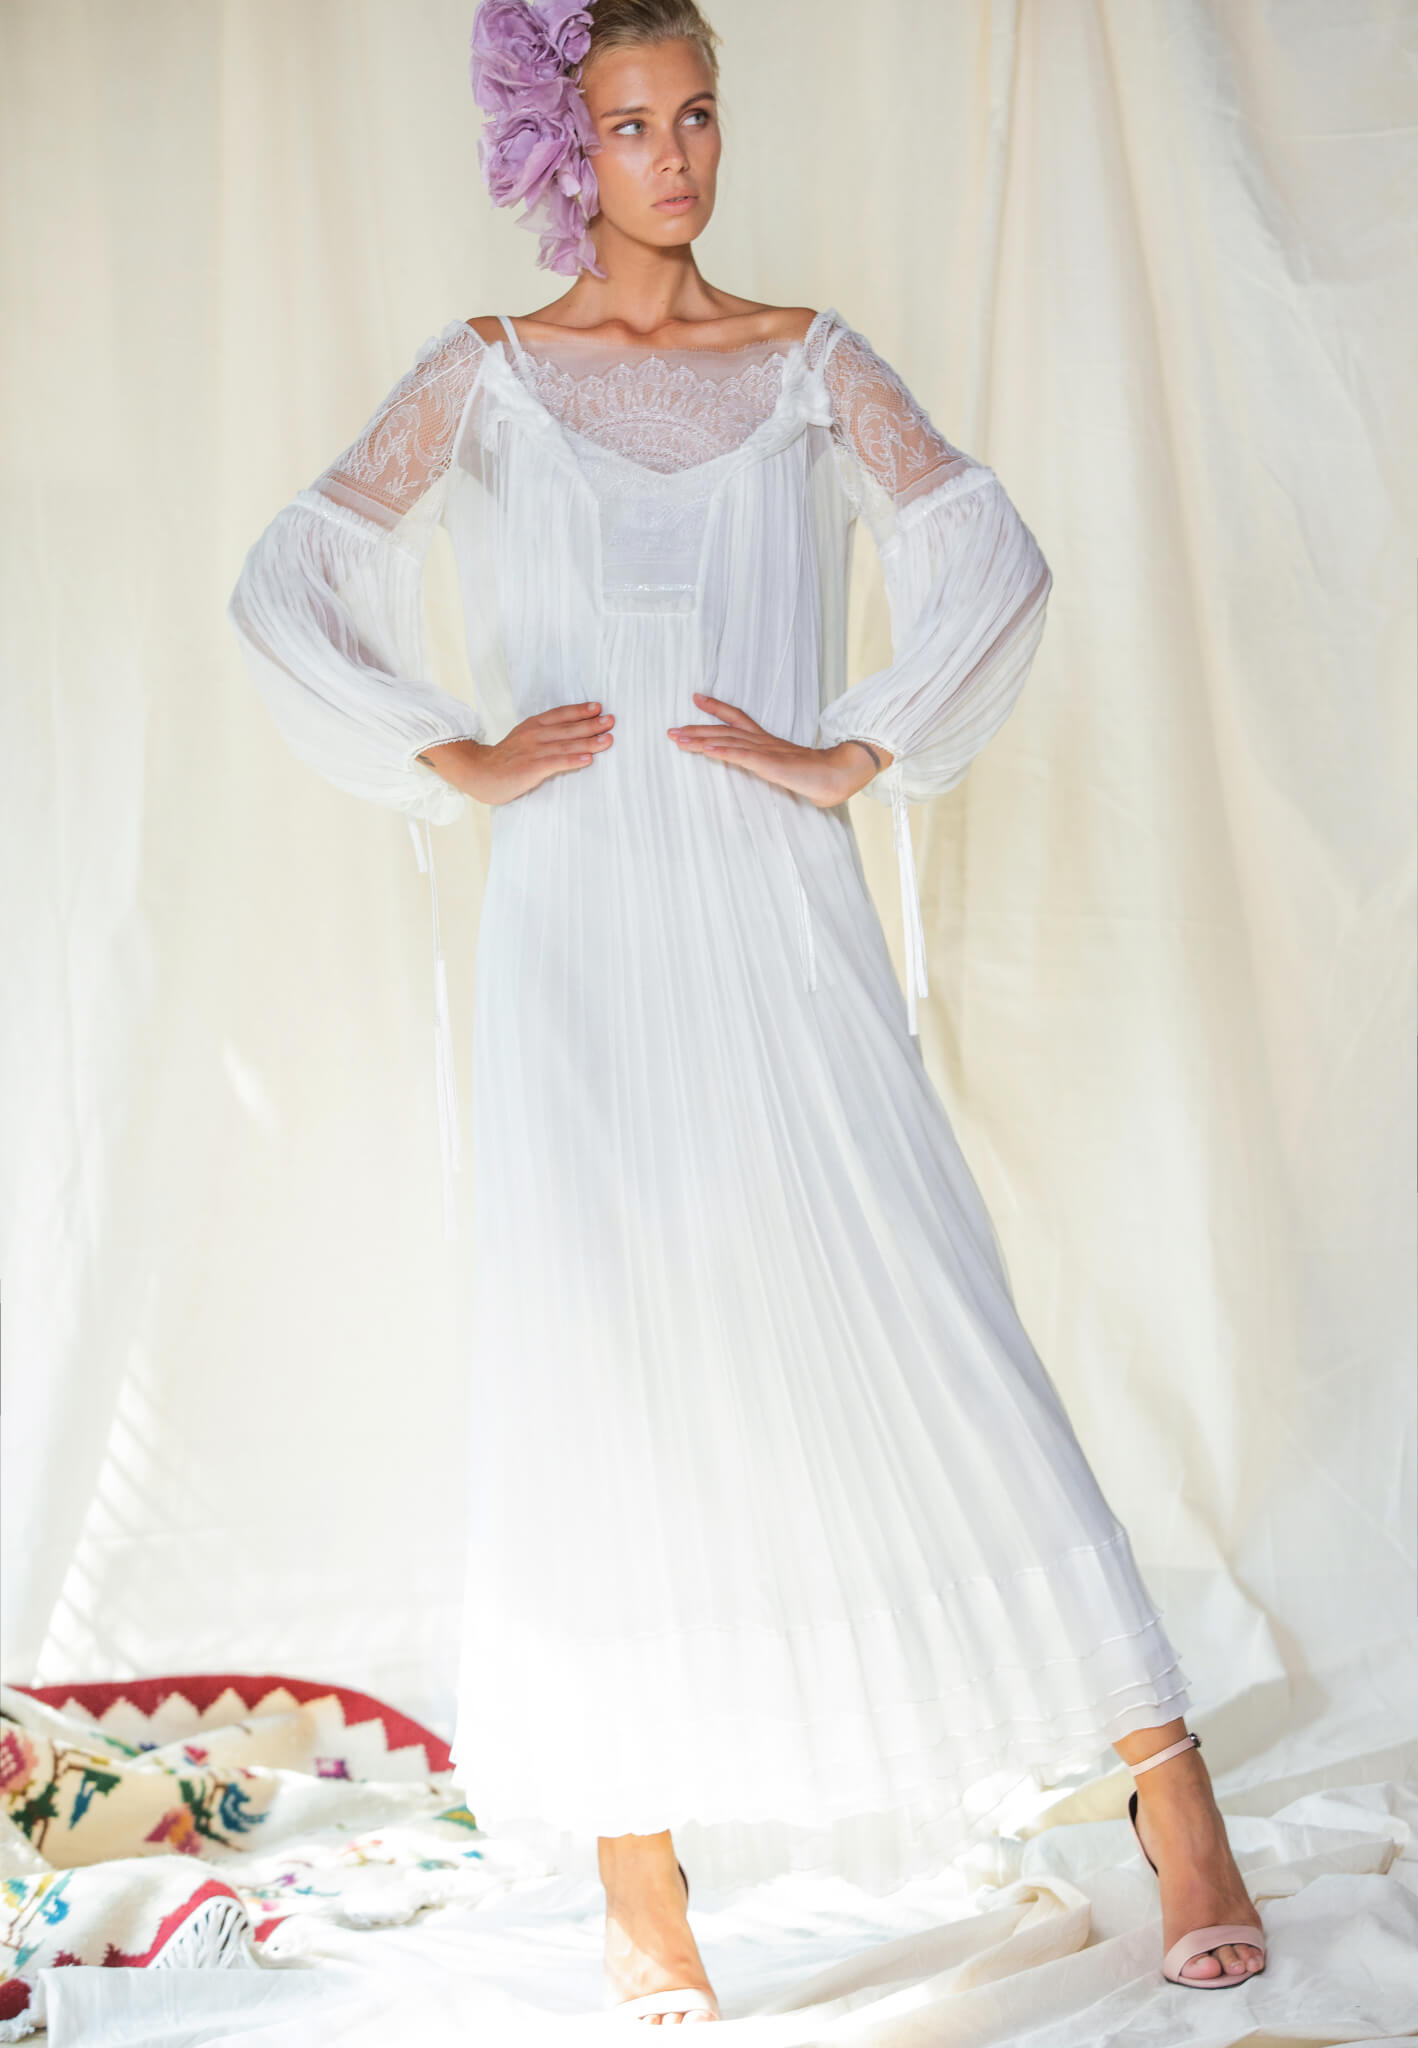 Bride silk dress with lace